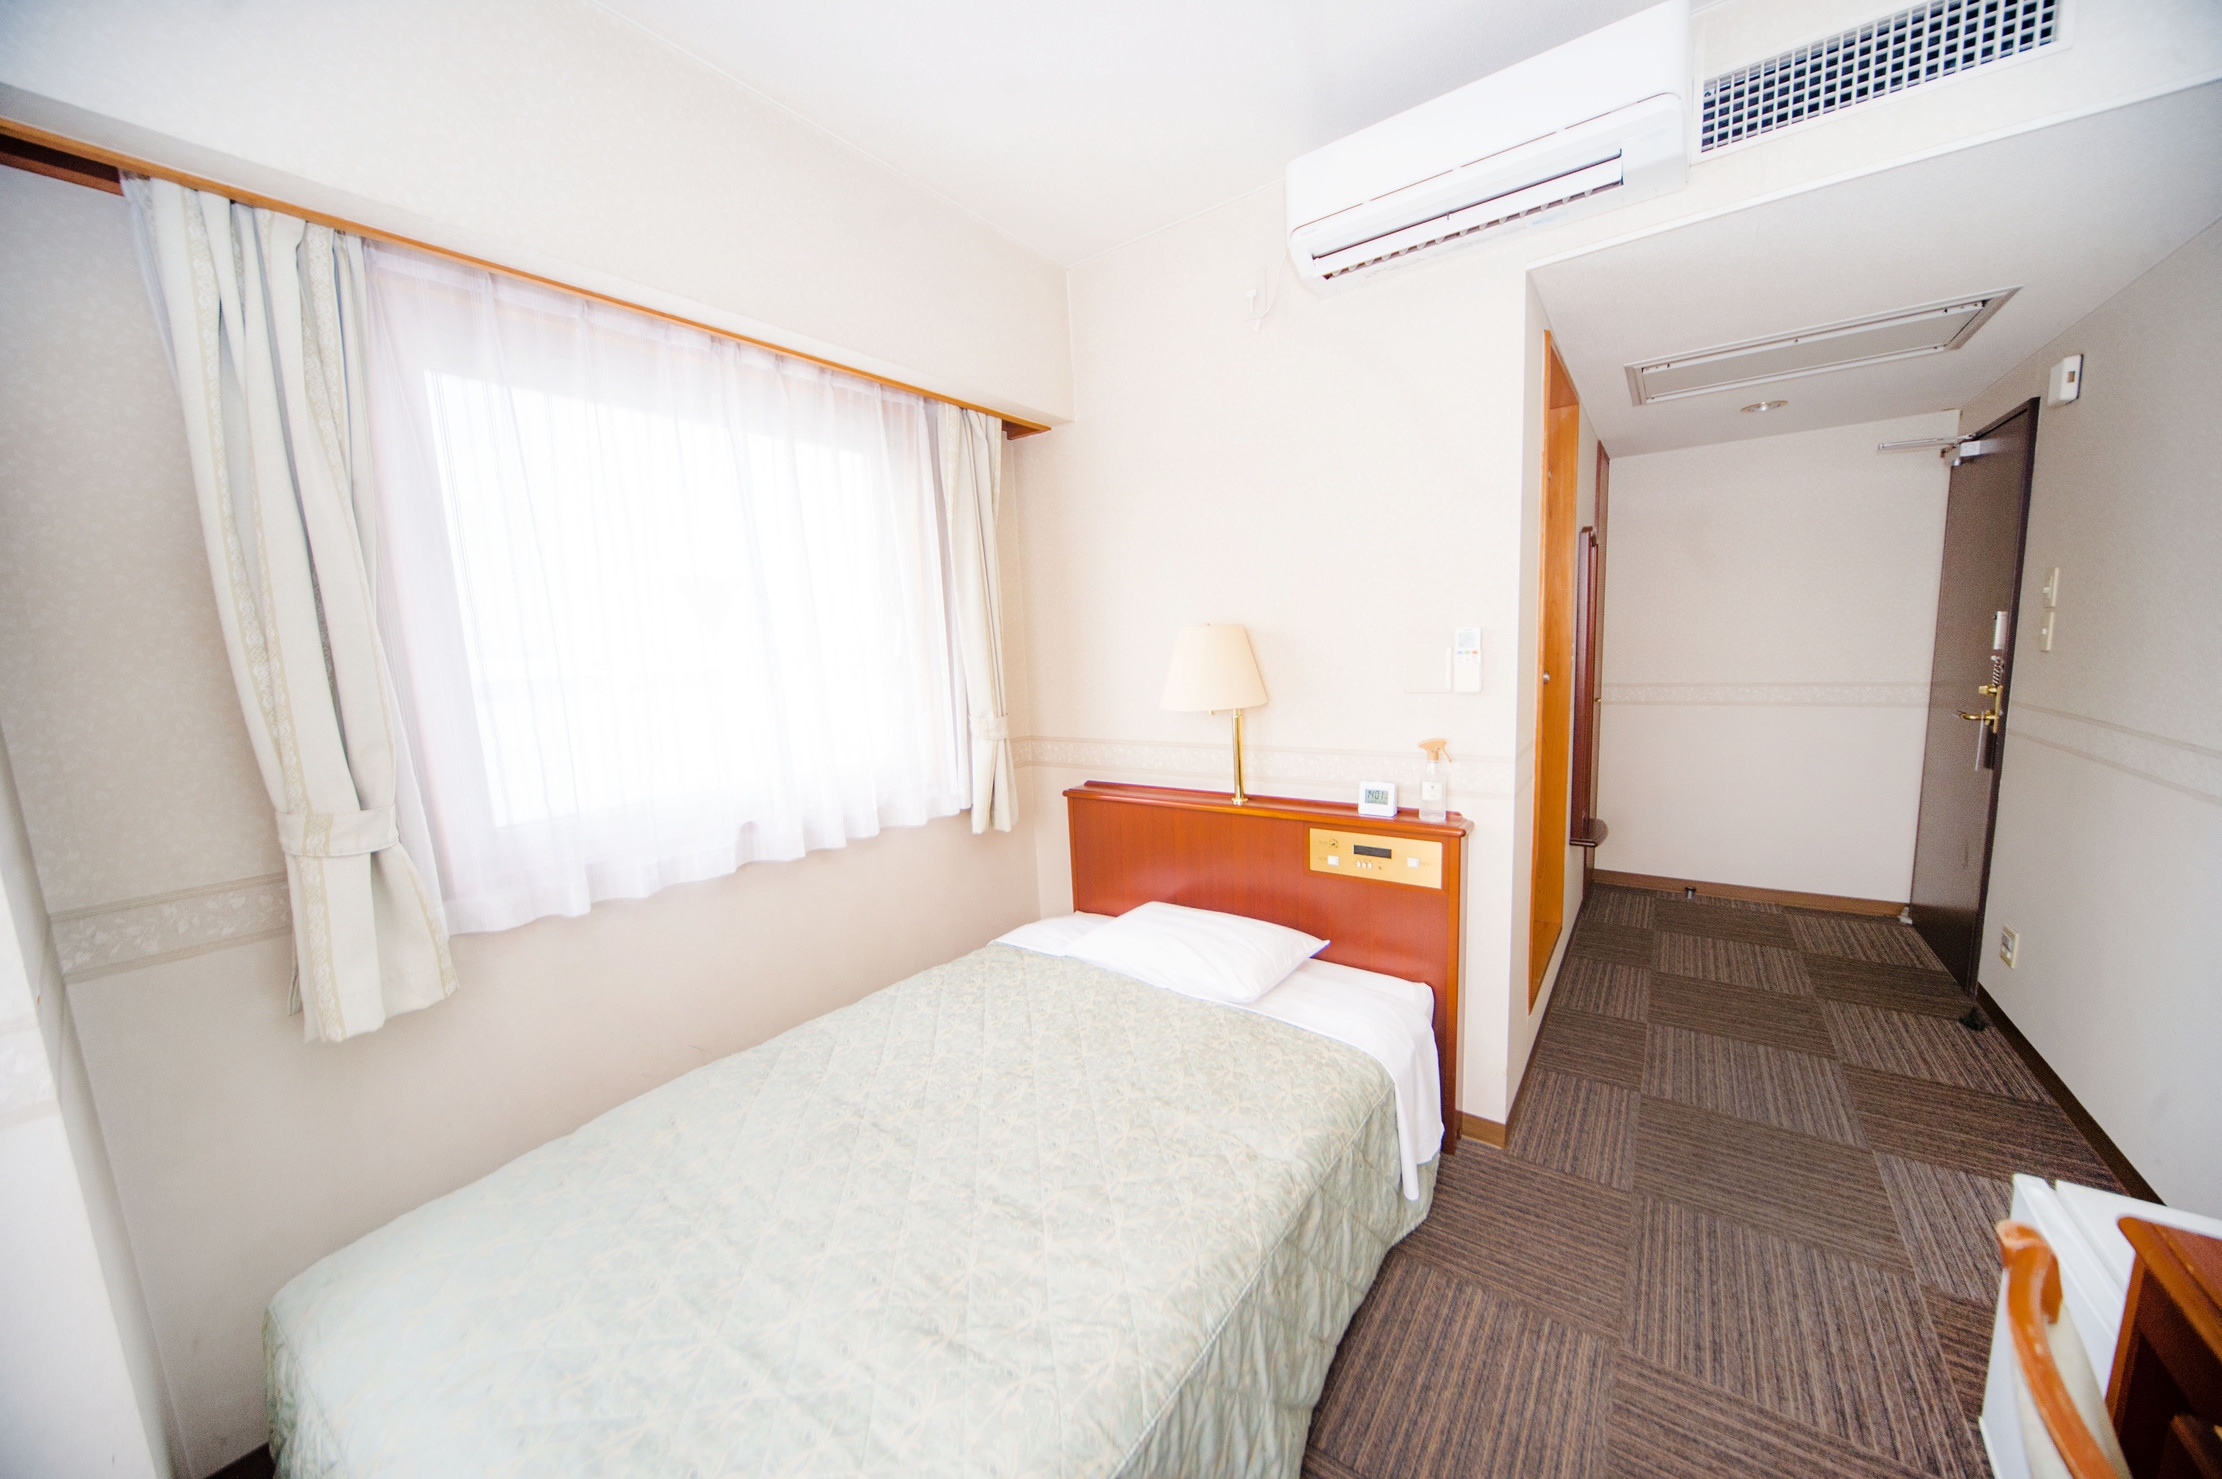 Hotel Grand Marriage Hotel Grand Marriage is conveniently located in the popular Omitama area. Featuring a satisfying list of amenities, guests will find their stay at the property a comfortable one. Restaurant, newspaper